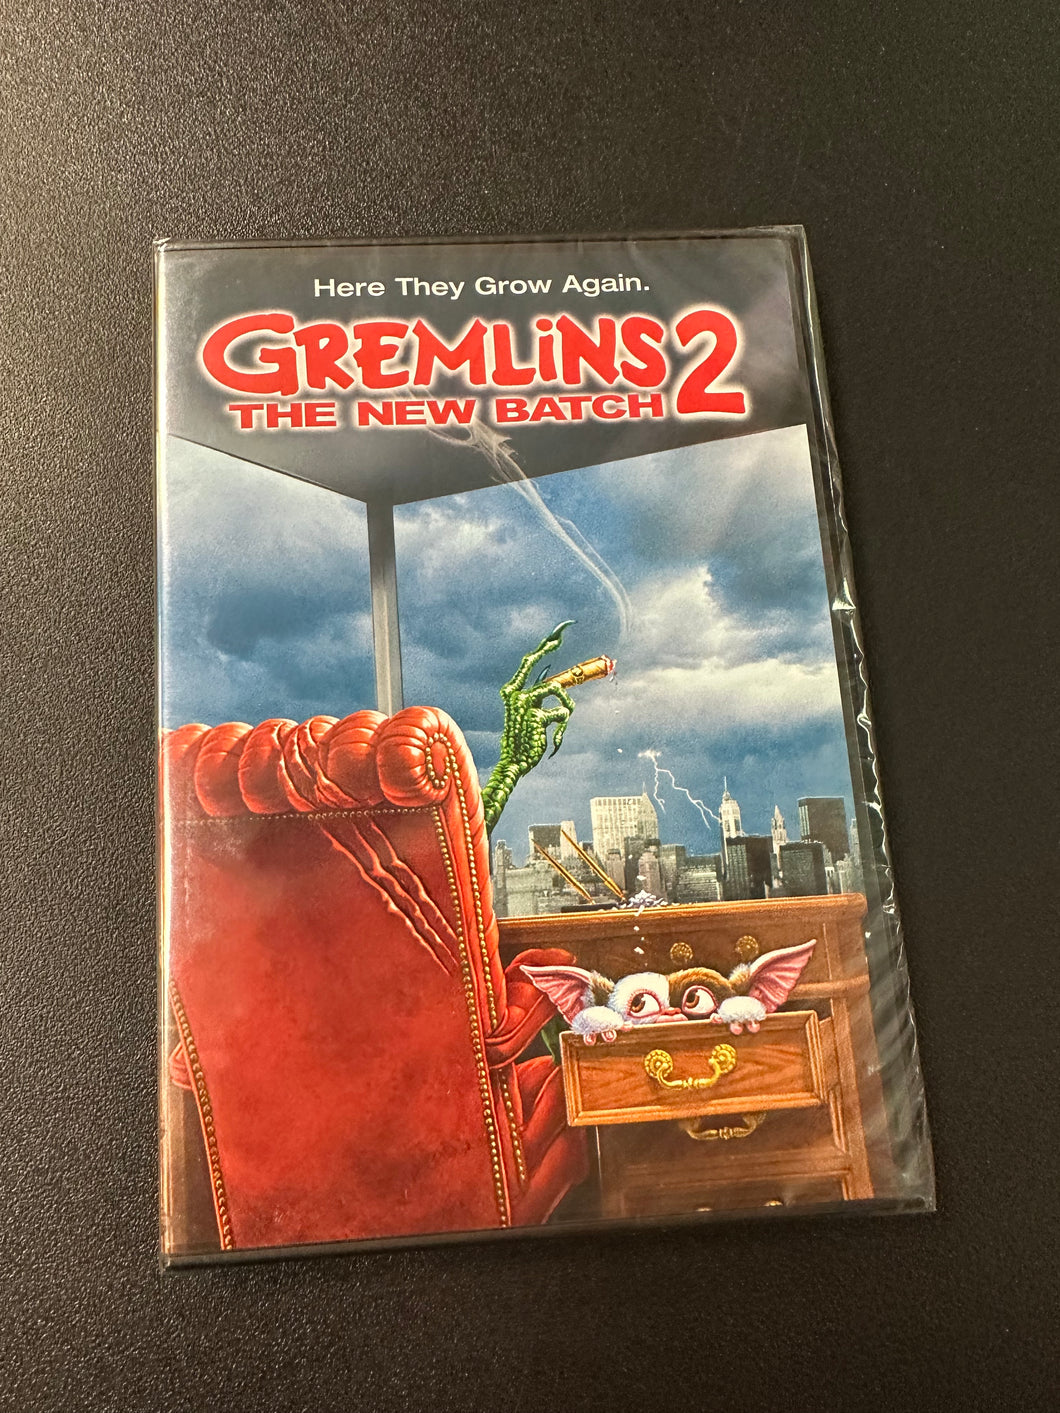 Gremlins 2 The New Batch [DVD] (NEW) Sealed